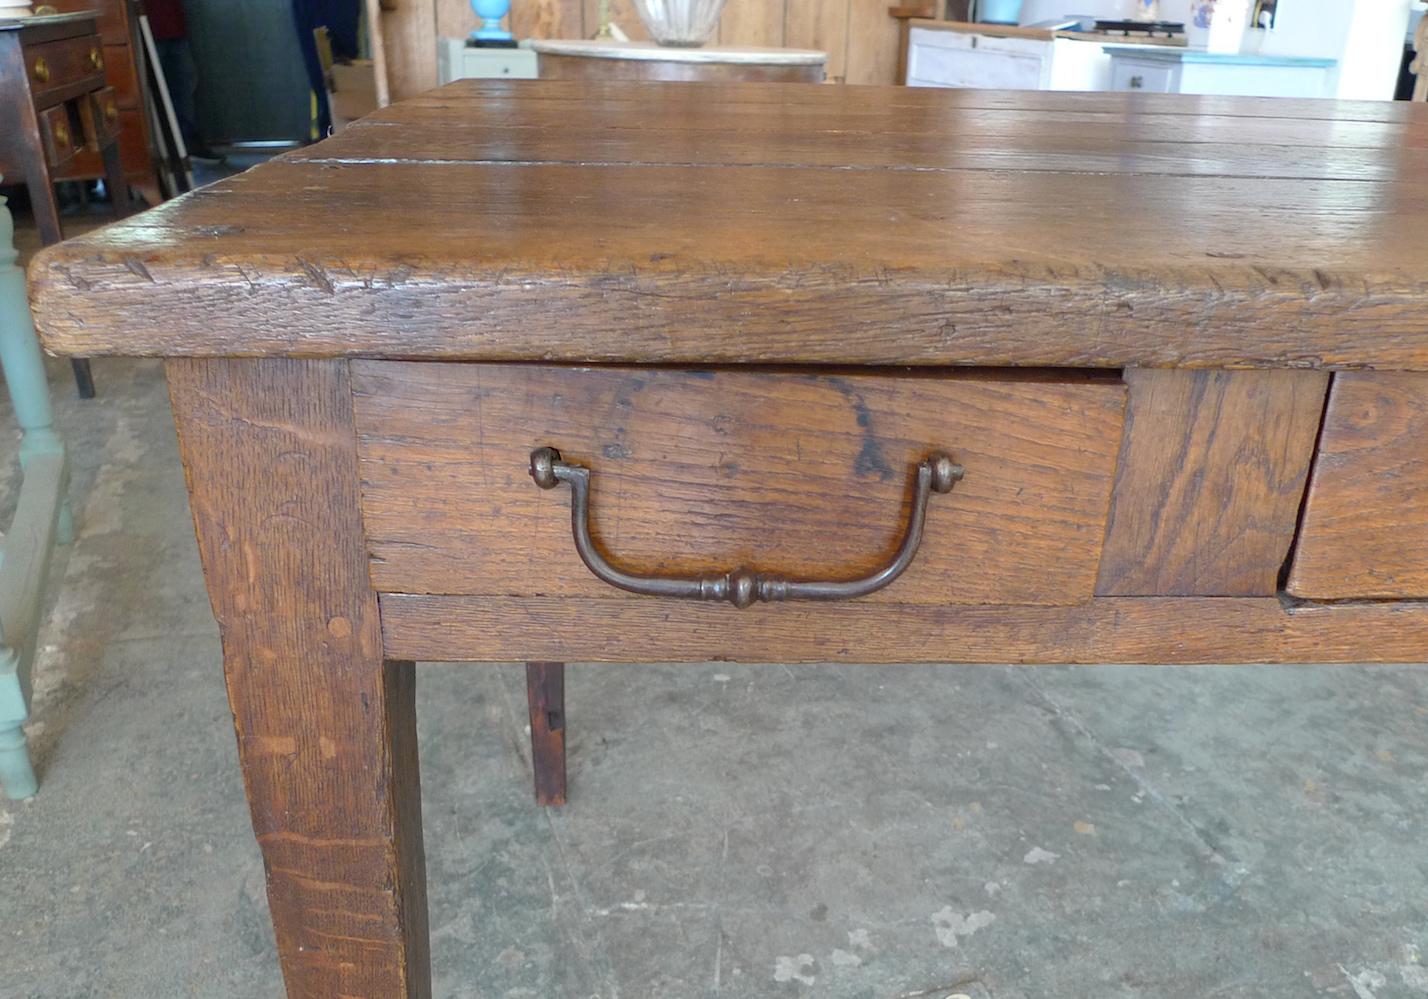 19th Century French XIX Walnut Dining Table or Desk with 3 Drawers and Original Hardware.